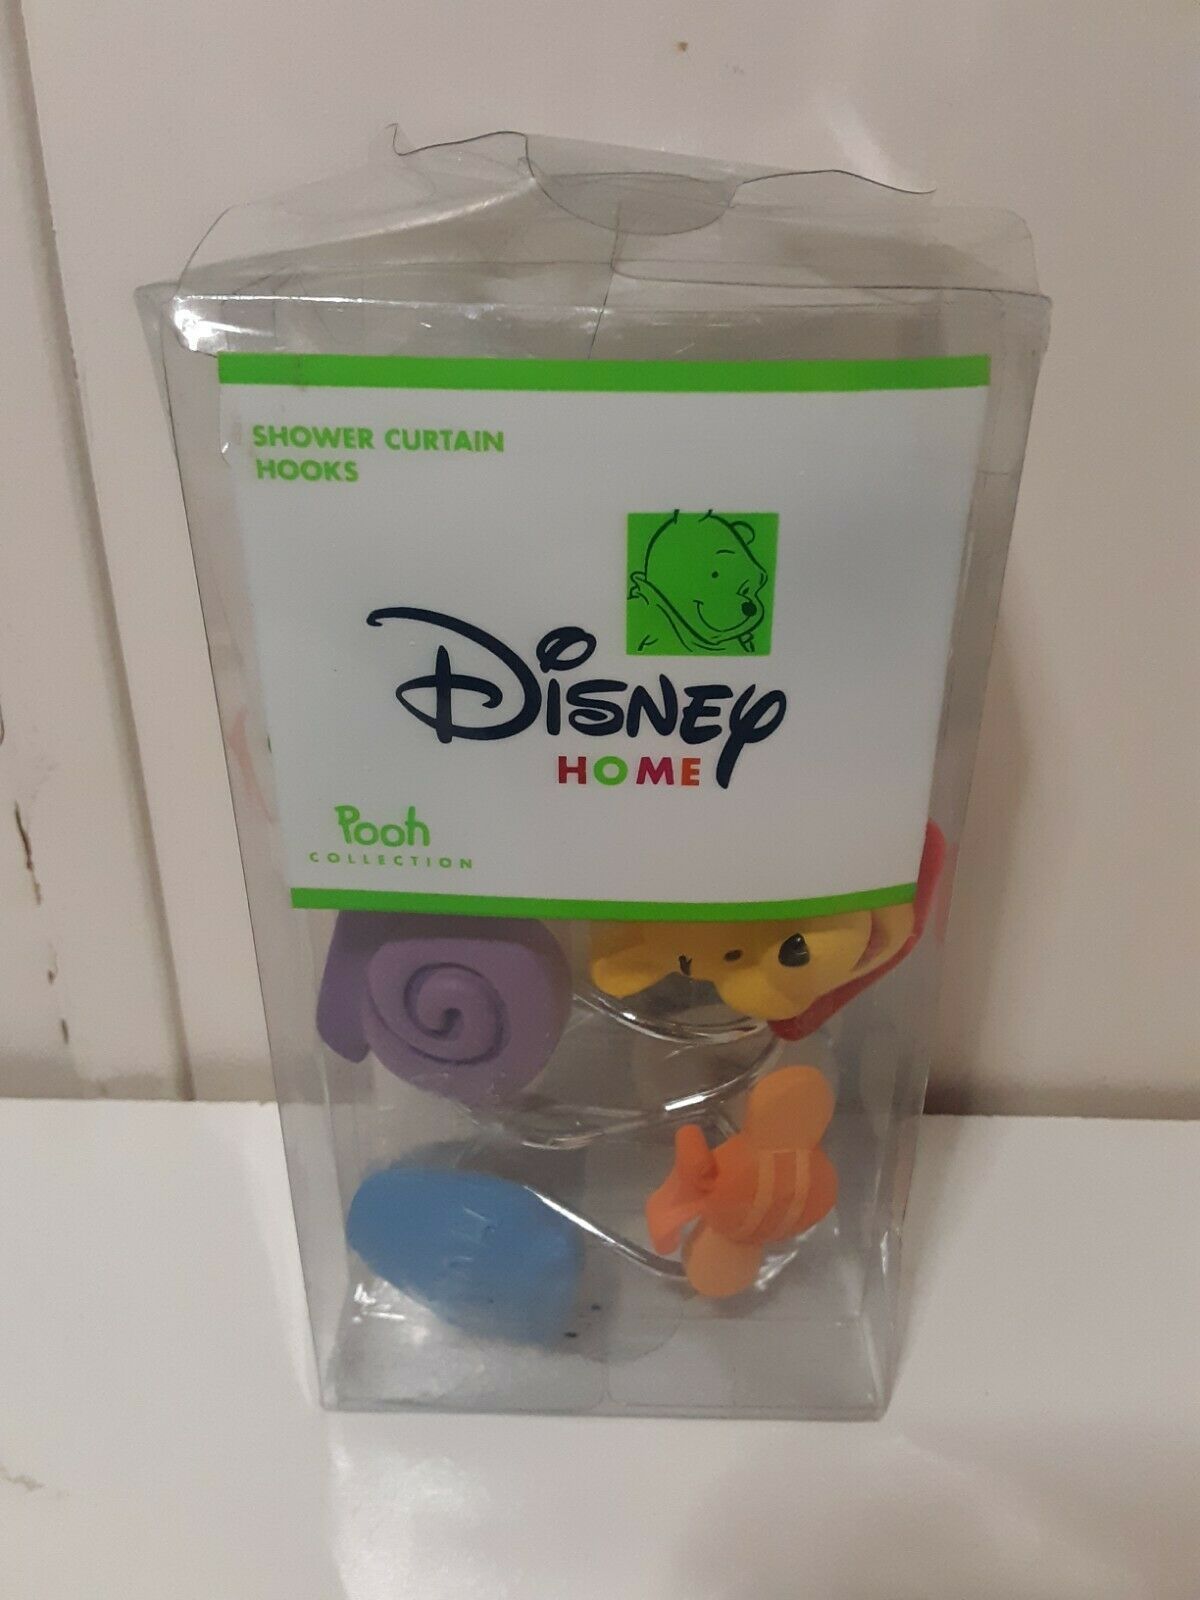 Disney Home Pooh Collection Shower Curtain Hooks Brand New - $14.84